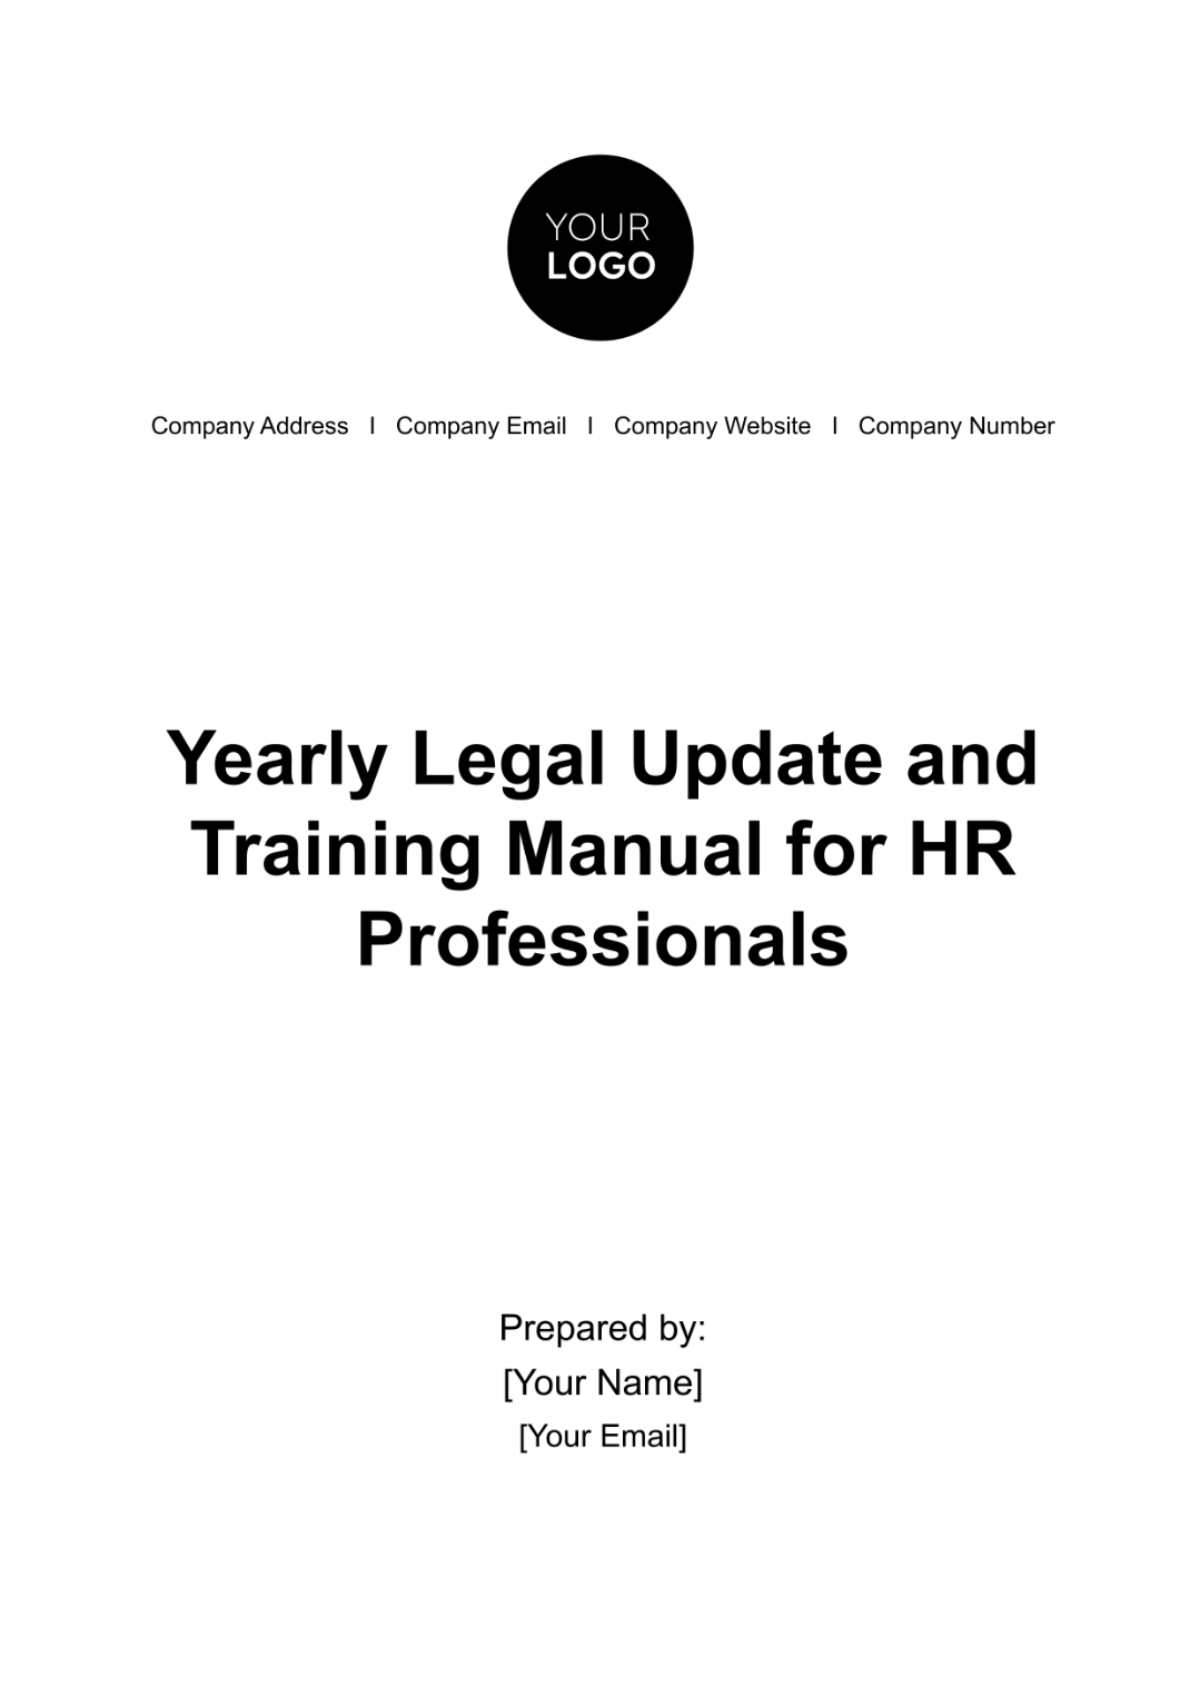 Free Yearly Legal Update and Training Manual for HR Professionals Template